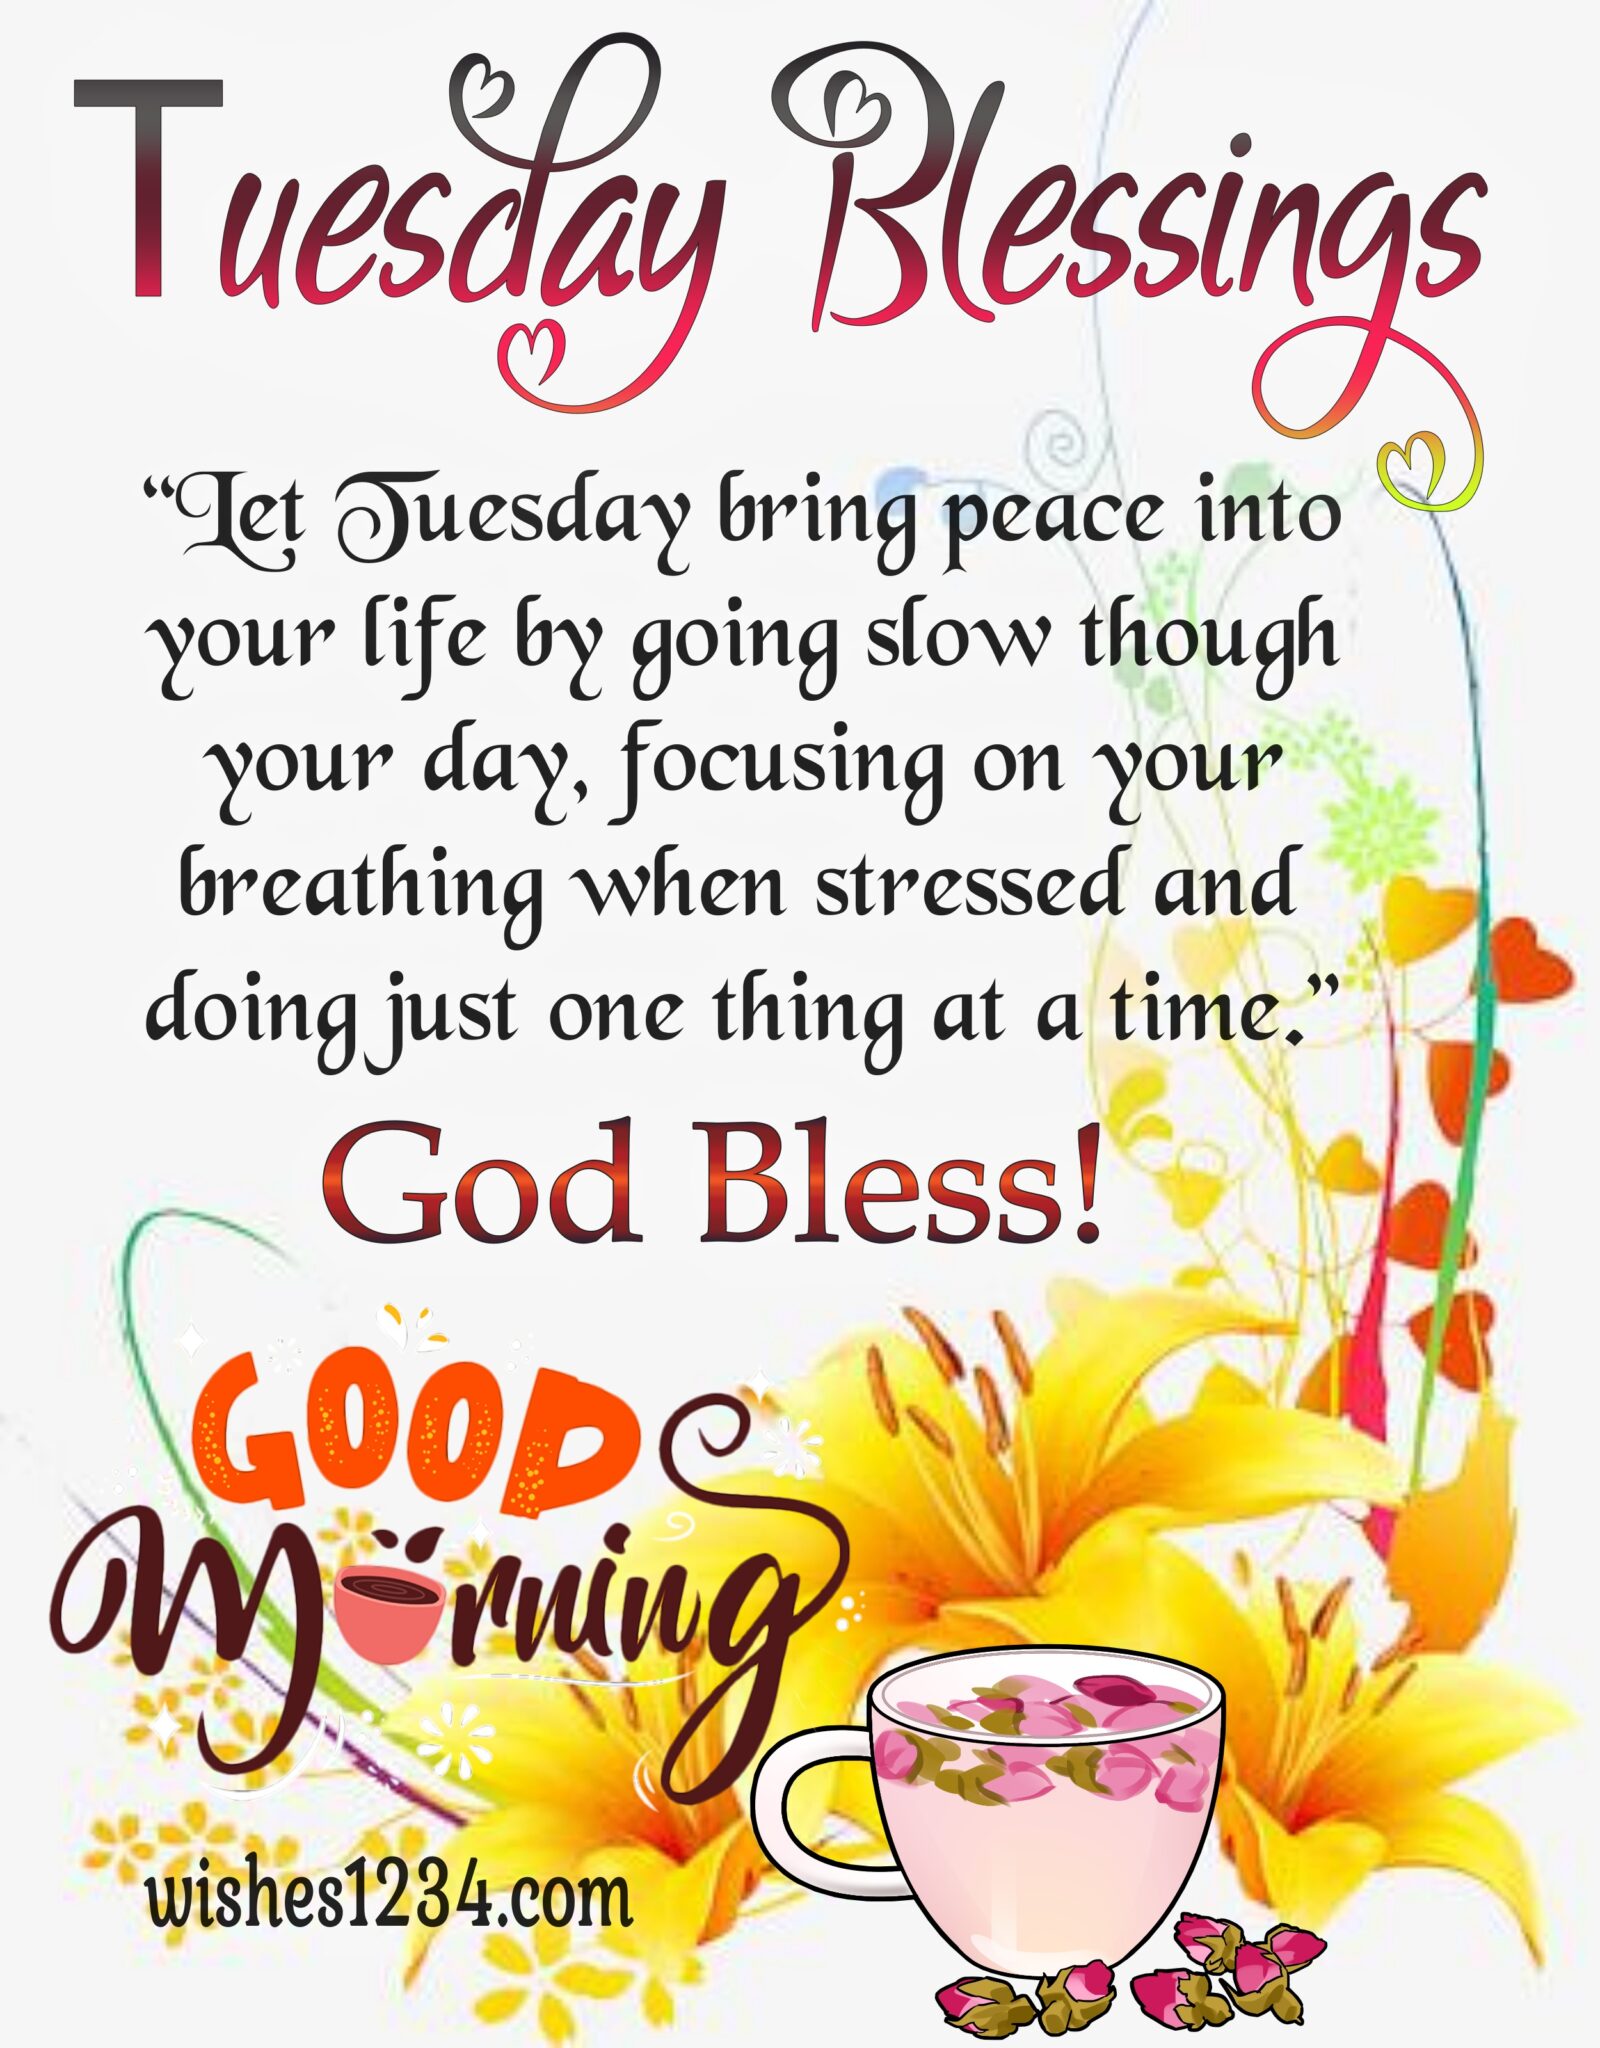 80+ Quotes for Tuesdays and Blessings with beautiful Images